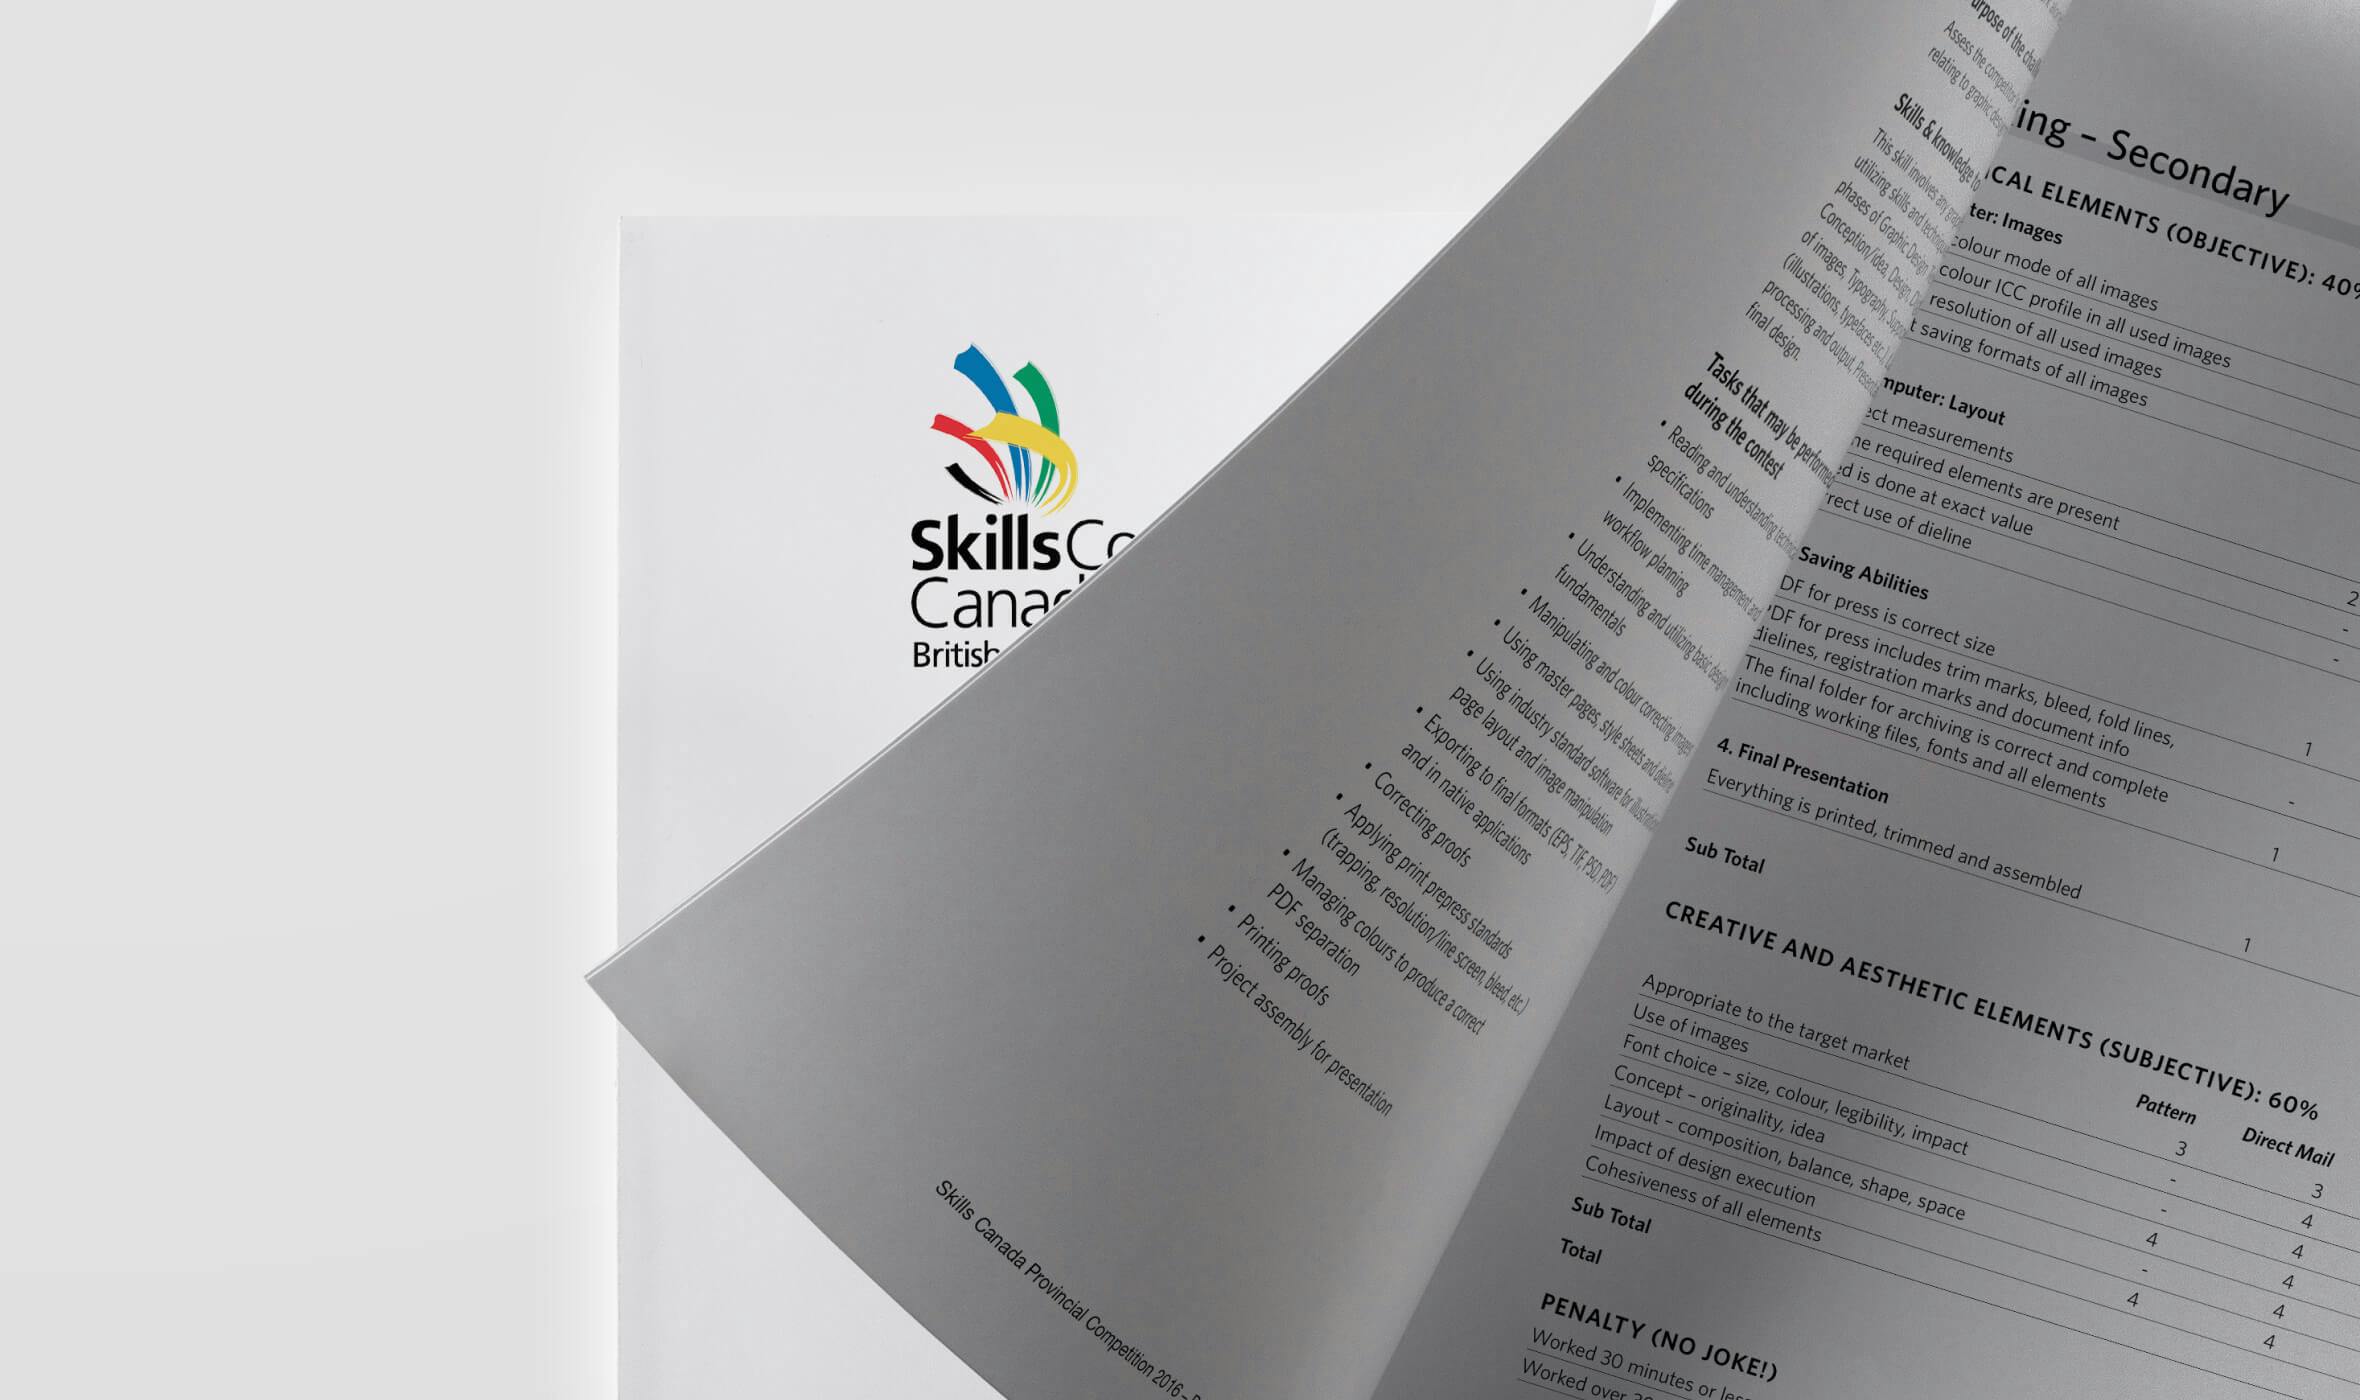 Skills / Compétences Canada, non-profit organization is dedicated to promoting careers in technology and skilled trades. Excerpts from the judging criteria from their annual skills competition are shown on a print mockup.